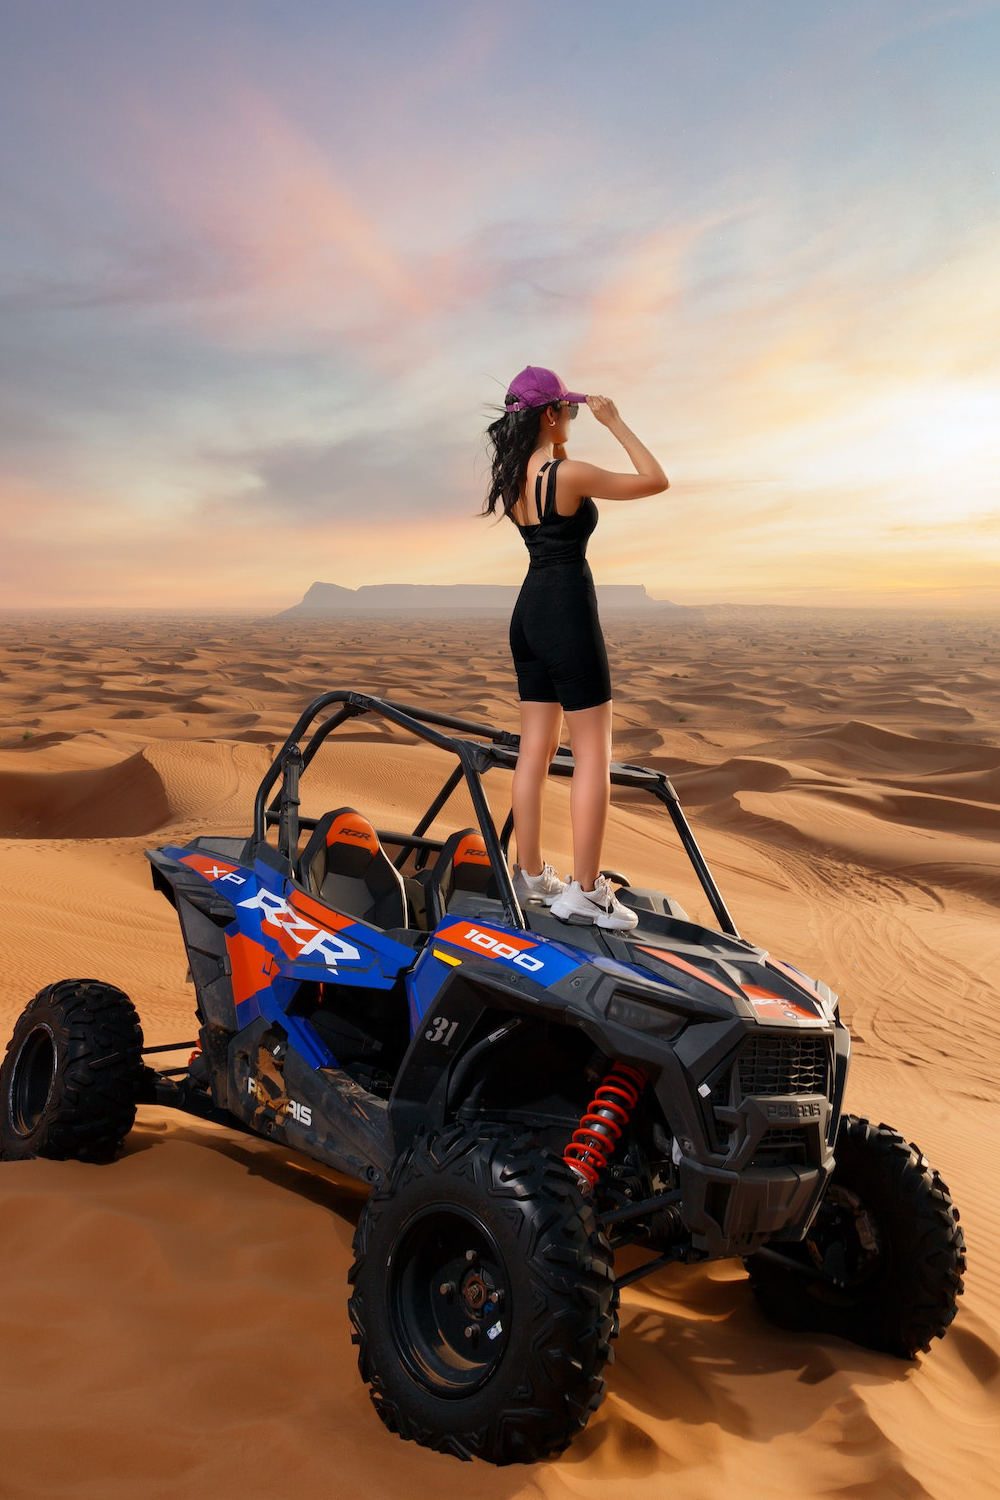 Woman standing on top of a quad bike wearing athletic outfit